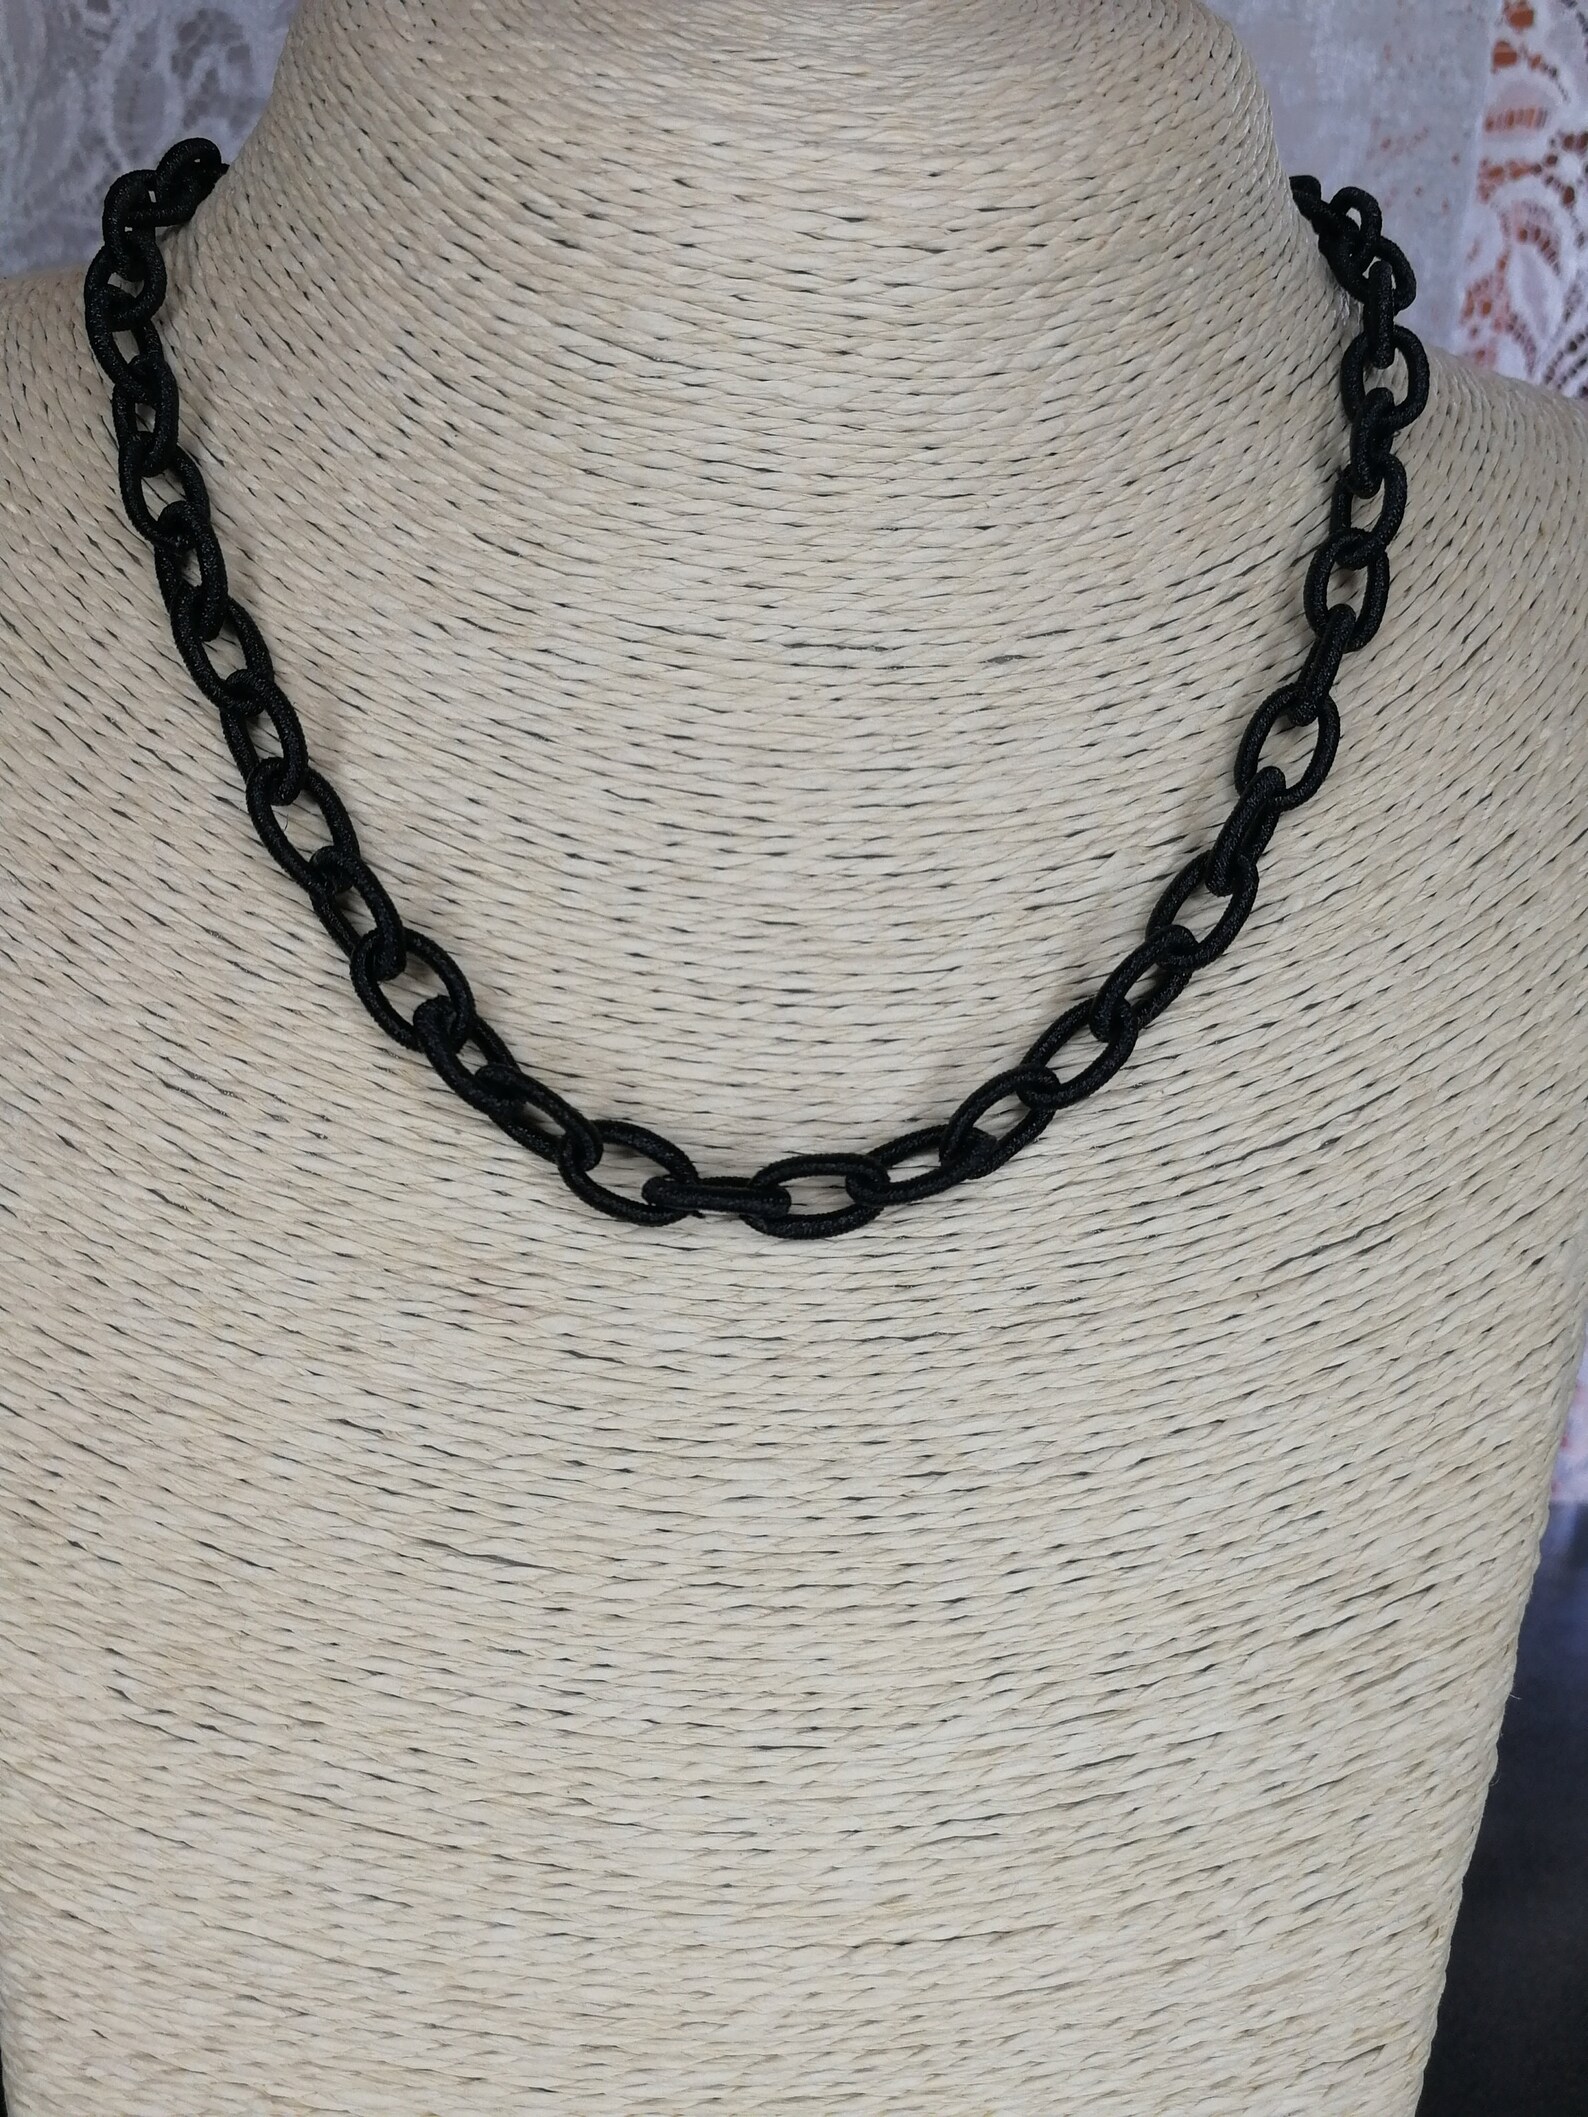 Chain necklace in Polyester Fabric 12 x 8 mm | Etsy